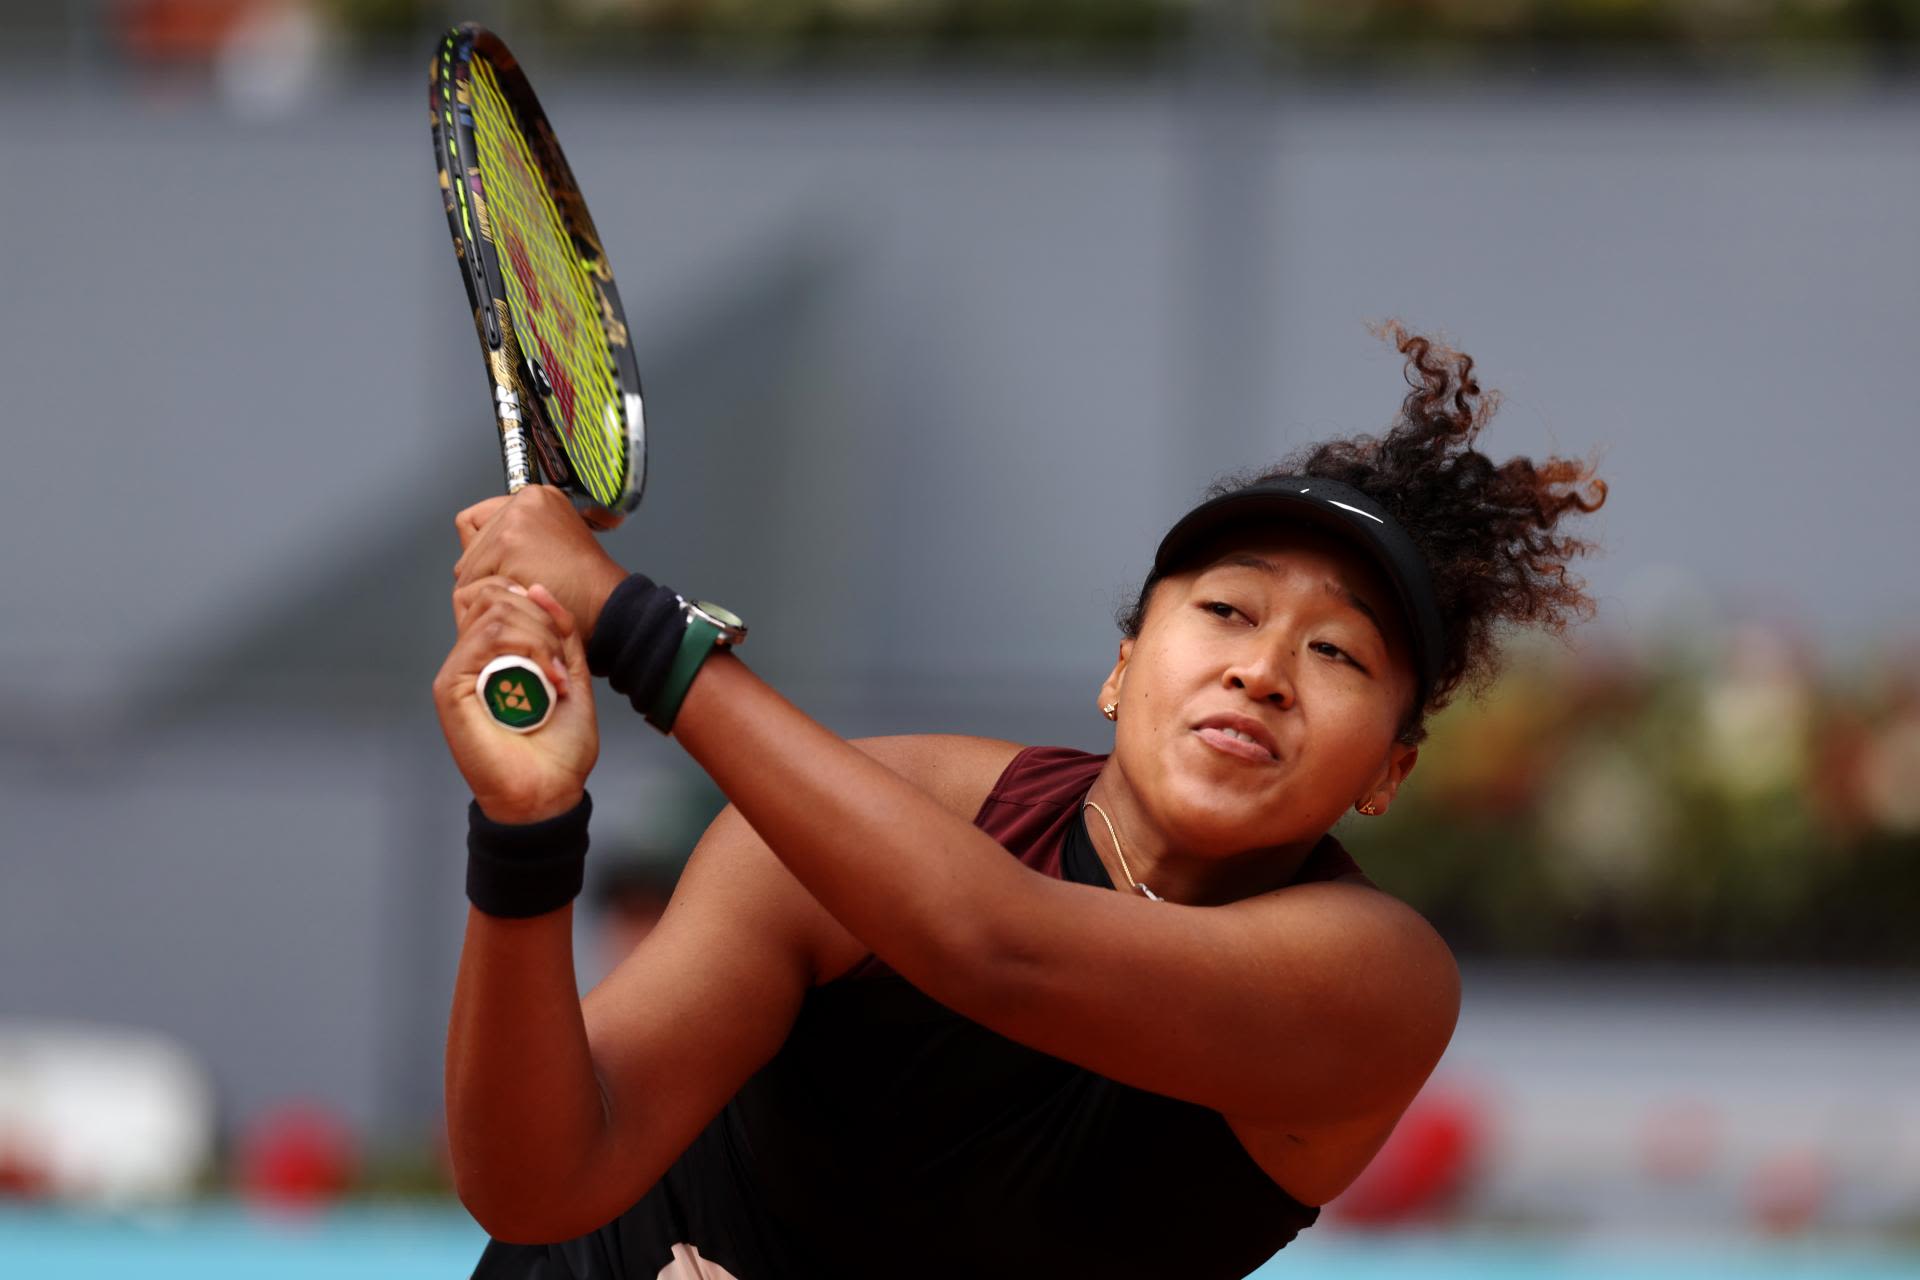 Coach shares how Naomi Osaka is taking that immediate success is not happening yet